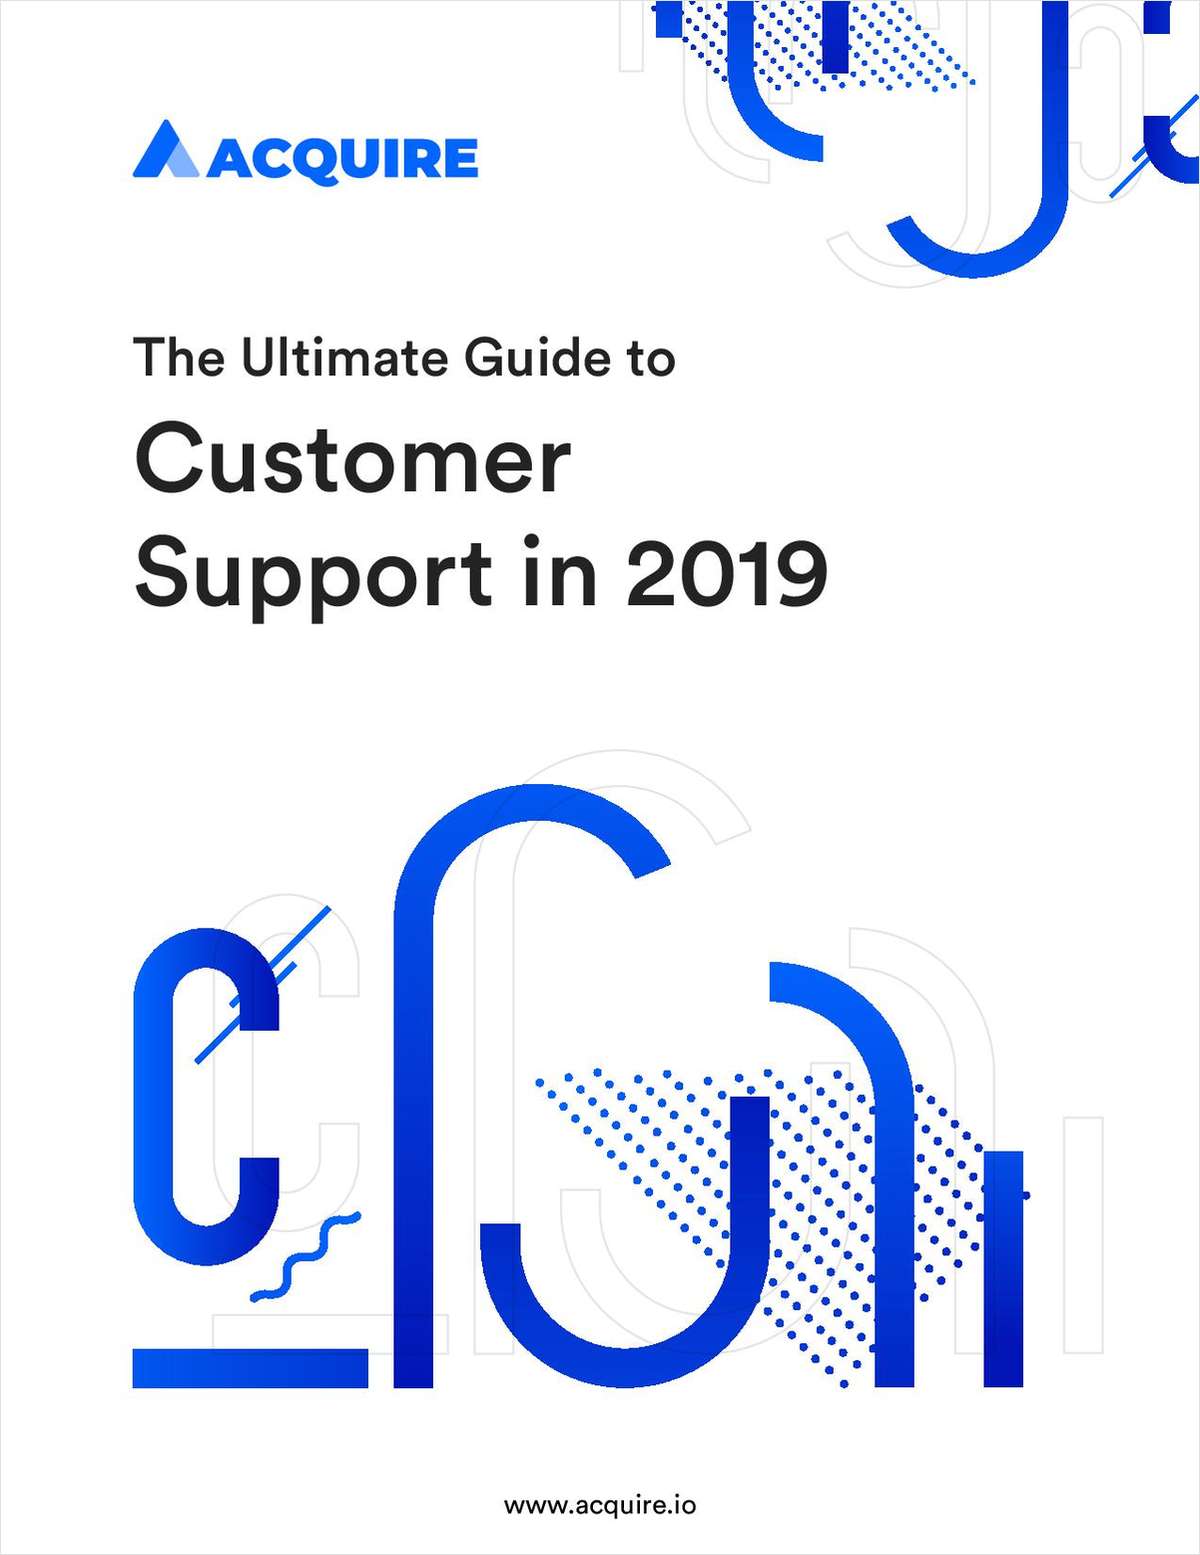 An Ultimate Guide to Customer Support in 2019